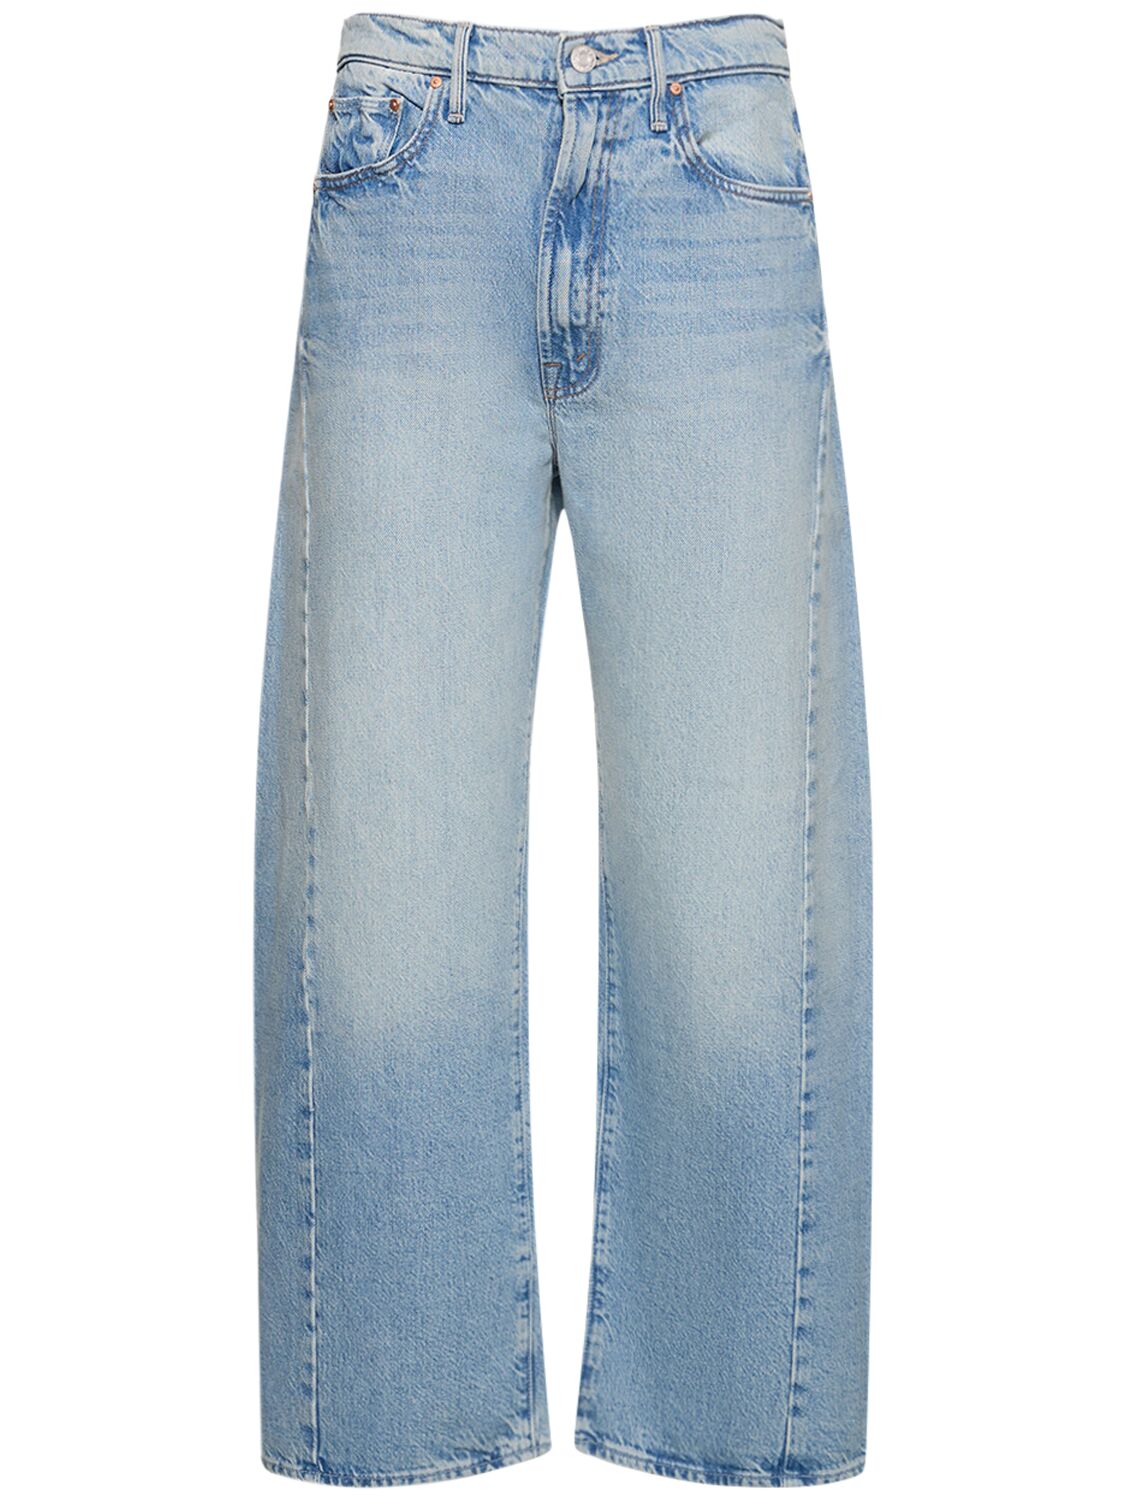 Image of The Half Pipe Ankle Cotton Denim Jeans